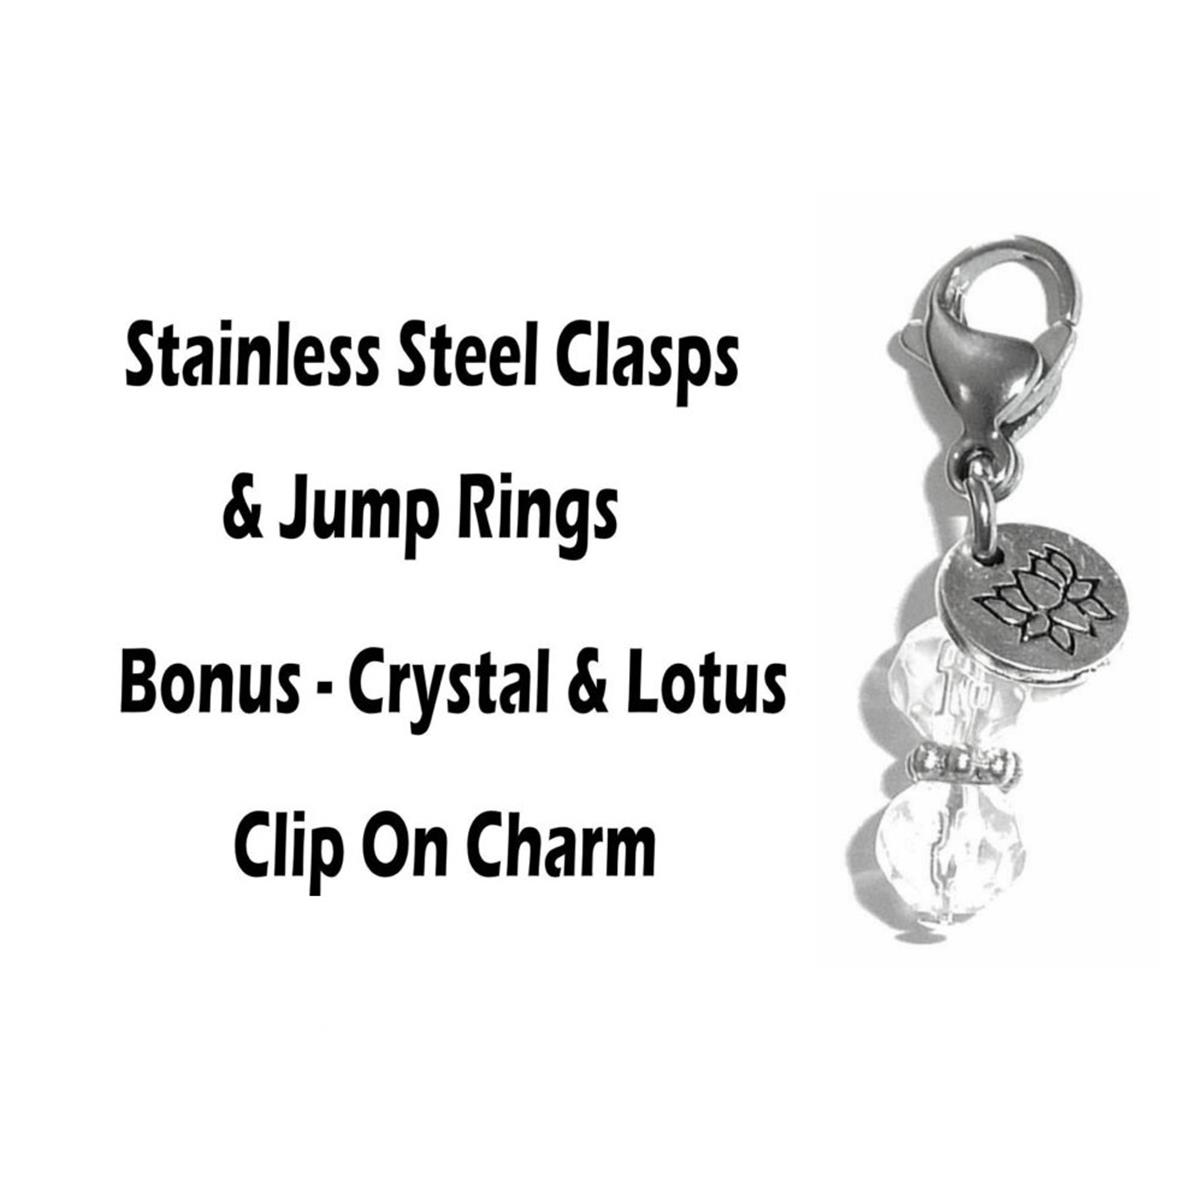 Bridal Party Mix 2 Clip On Charms - Wedding Party Charms Clip On Anywhere